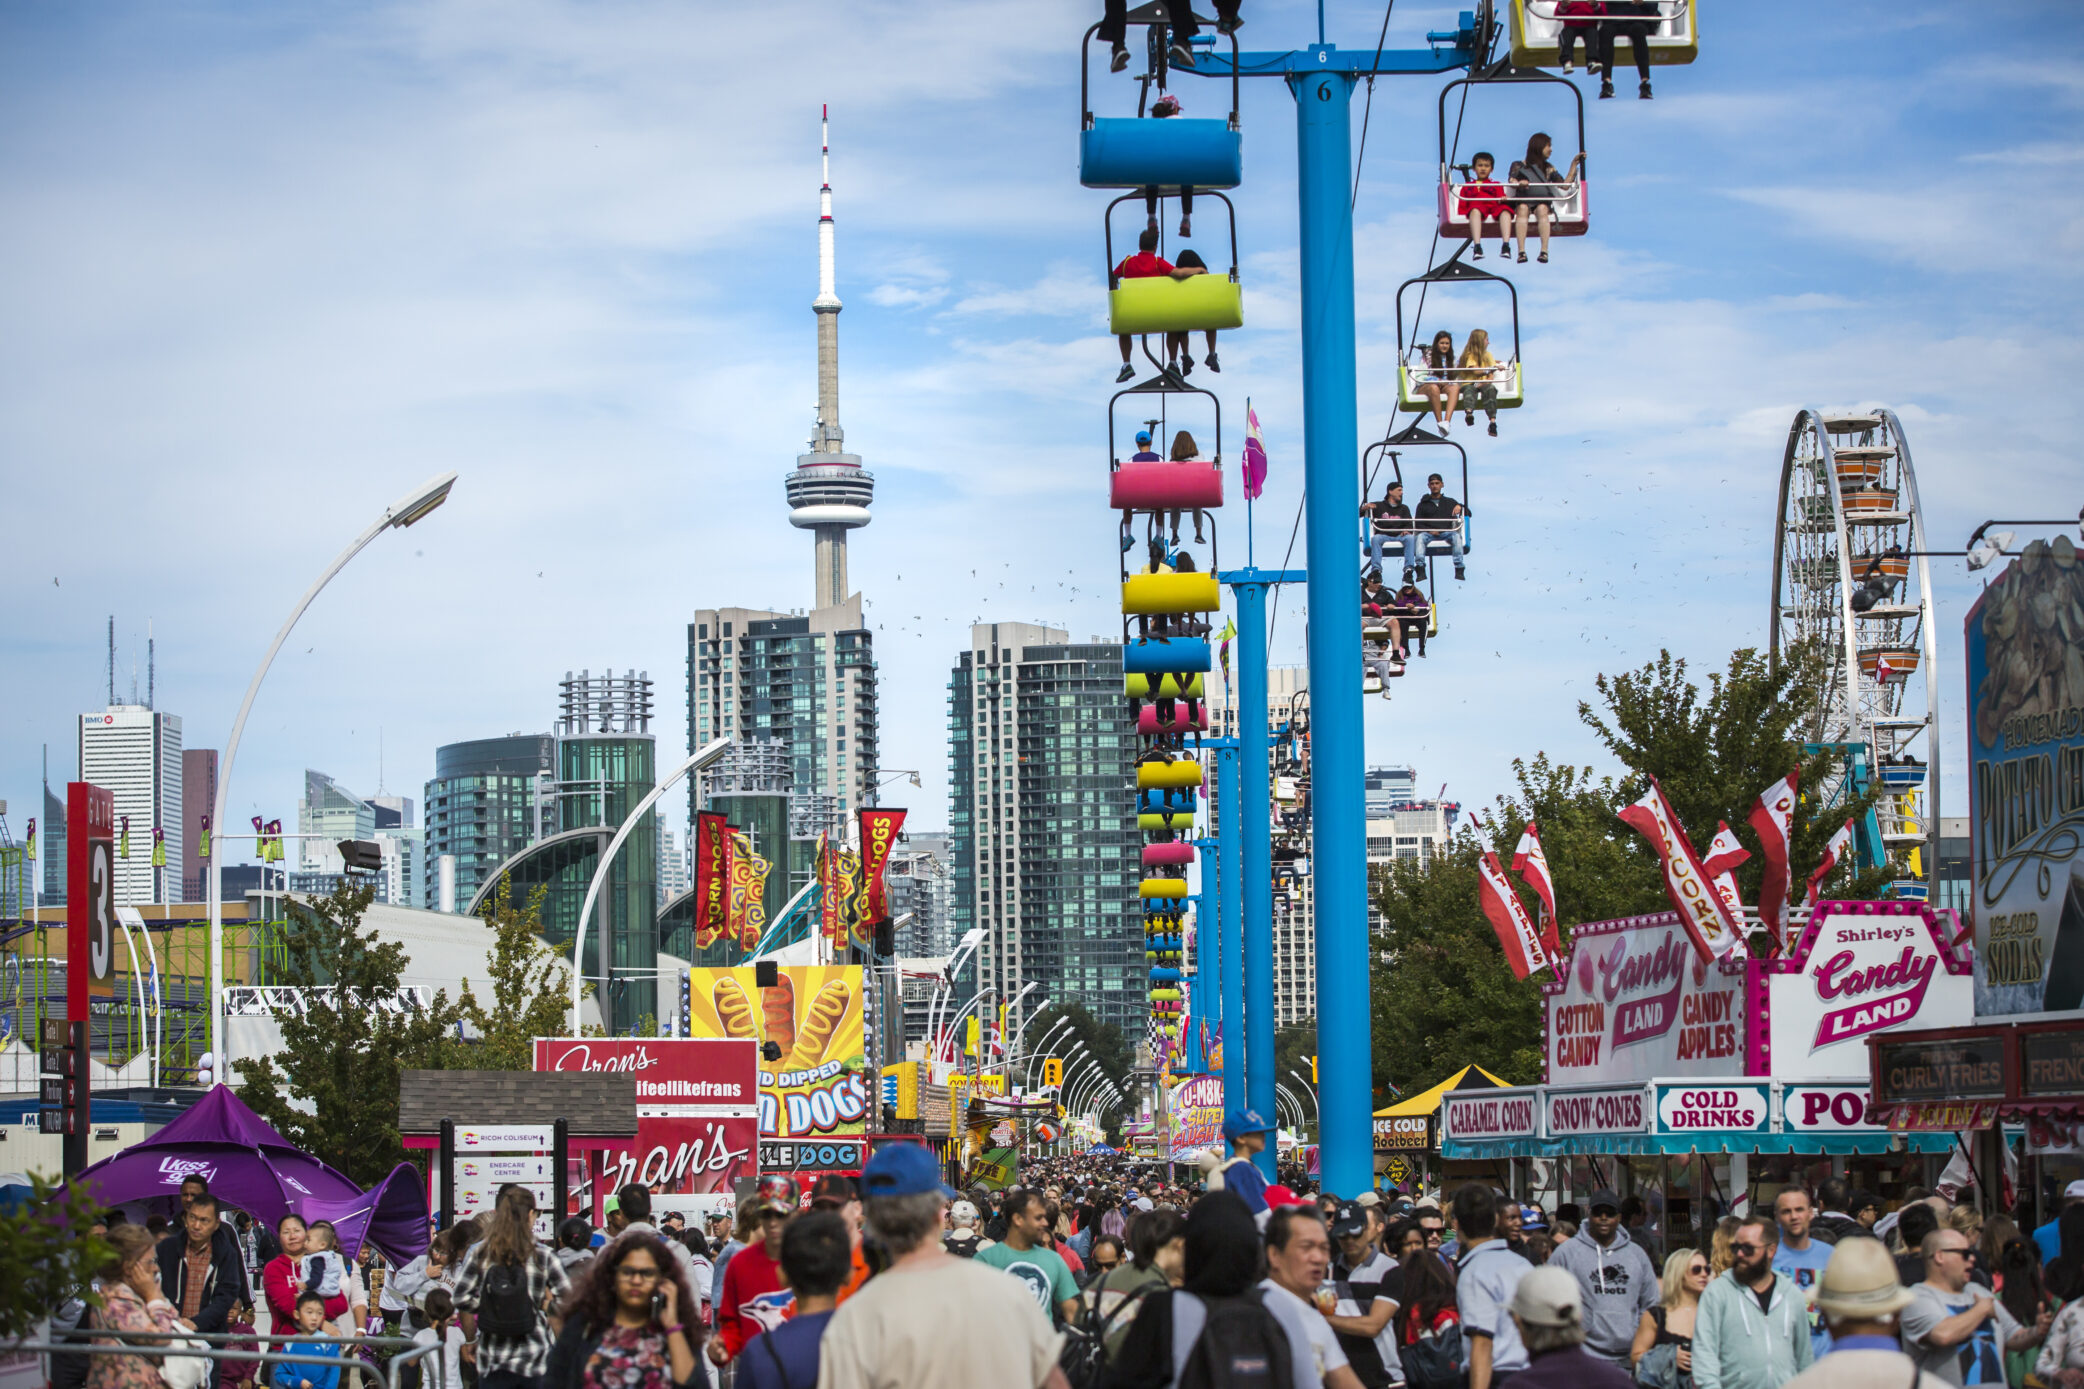 CNE Midway